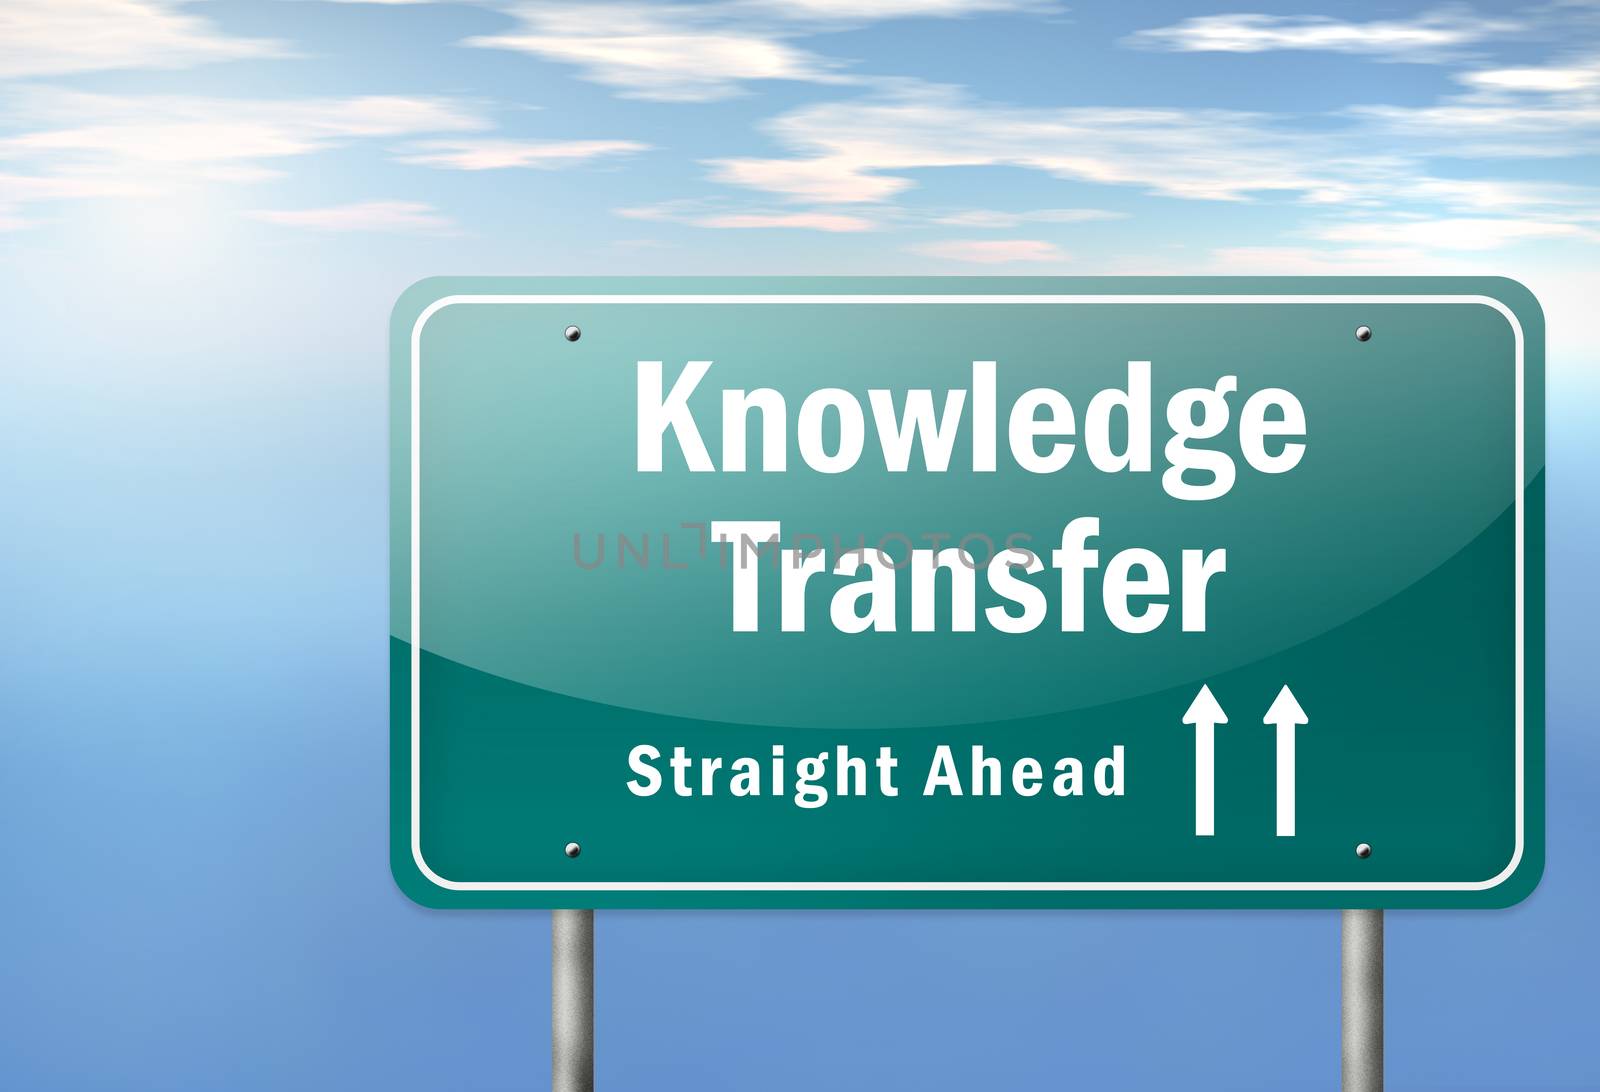 Highway Signpost "Knowledge Transfer" by mindscanner